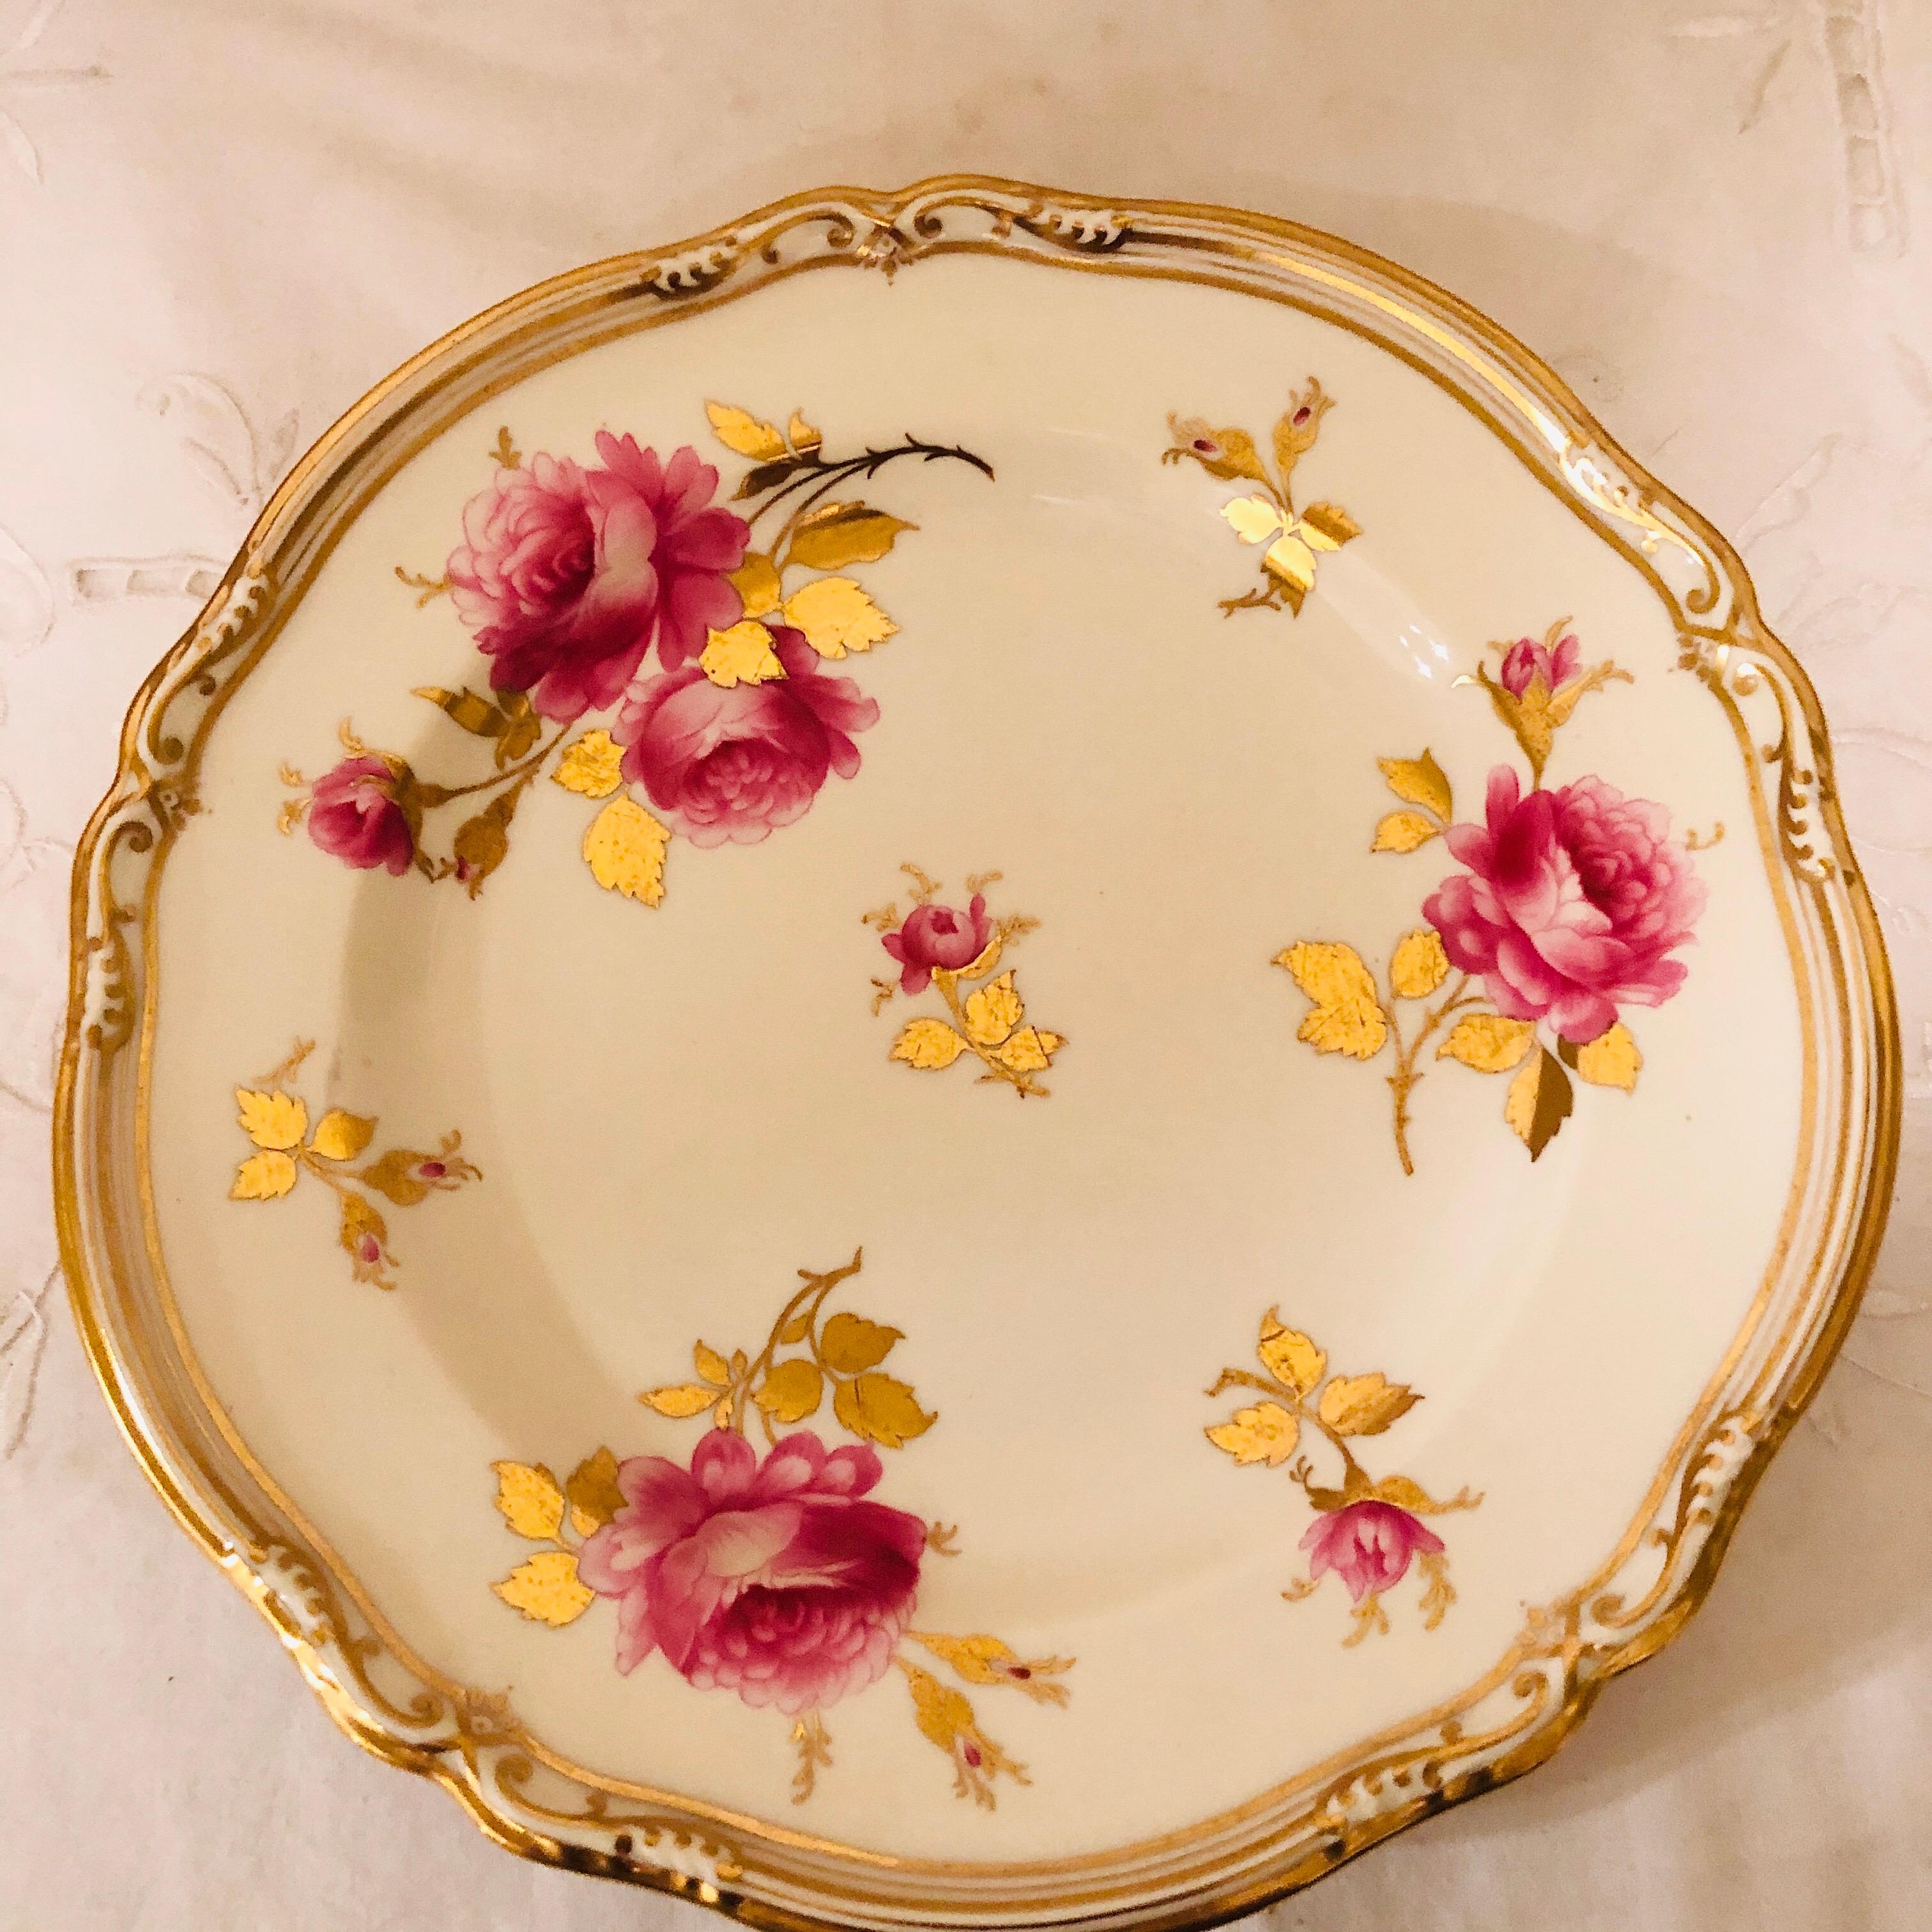 Porcelain Spode Made for Tiffany 68 Piece Dinner Service Decorated with Large Pink Roses